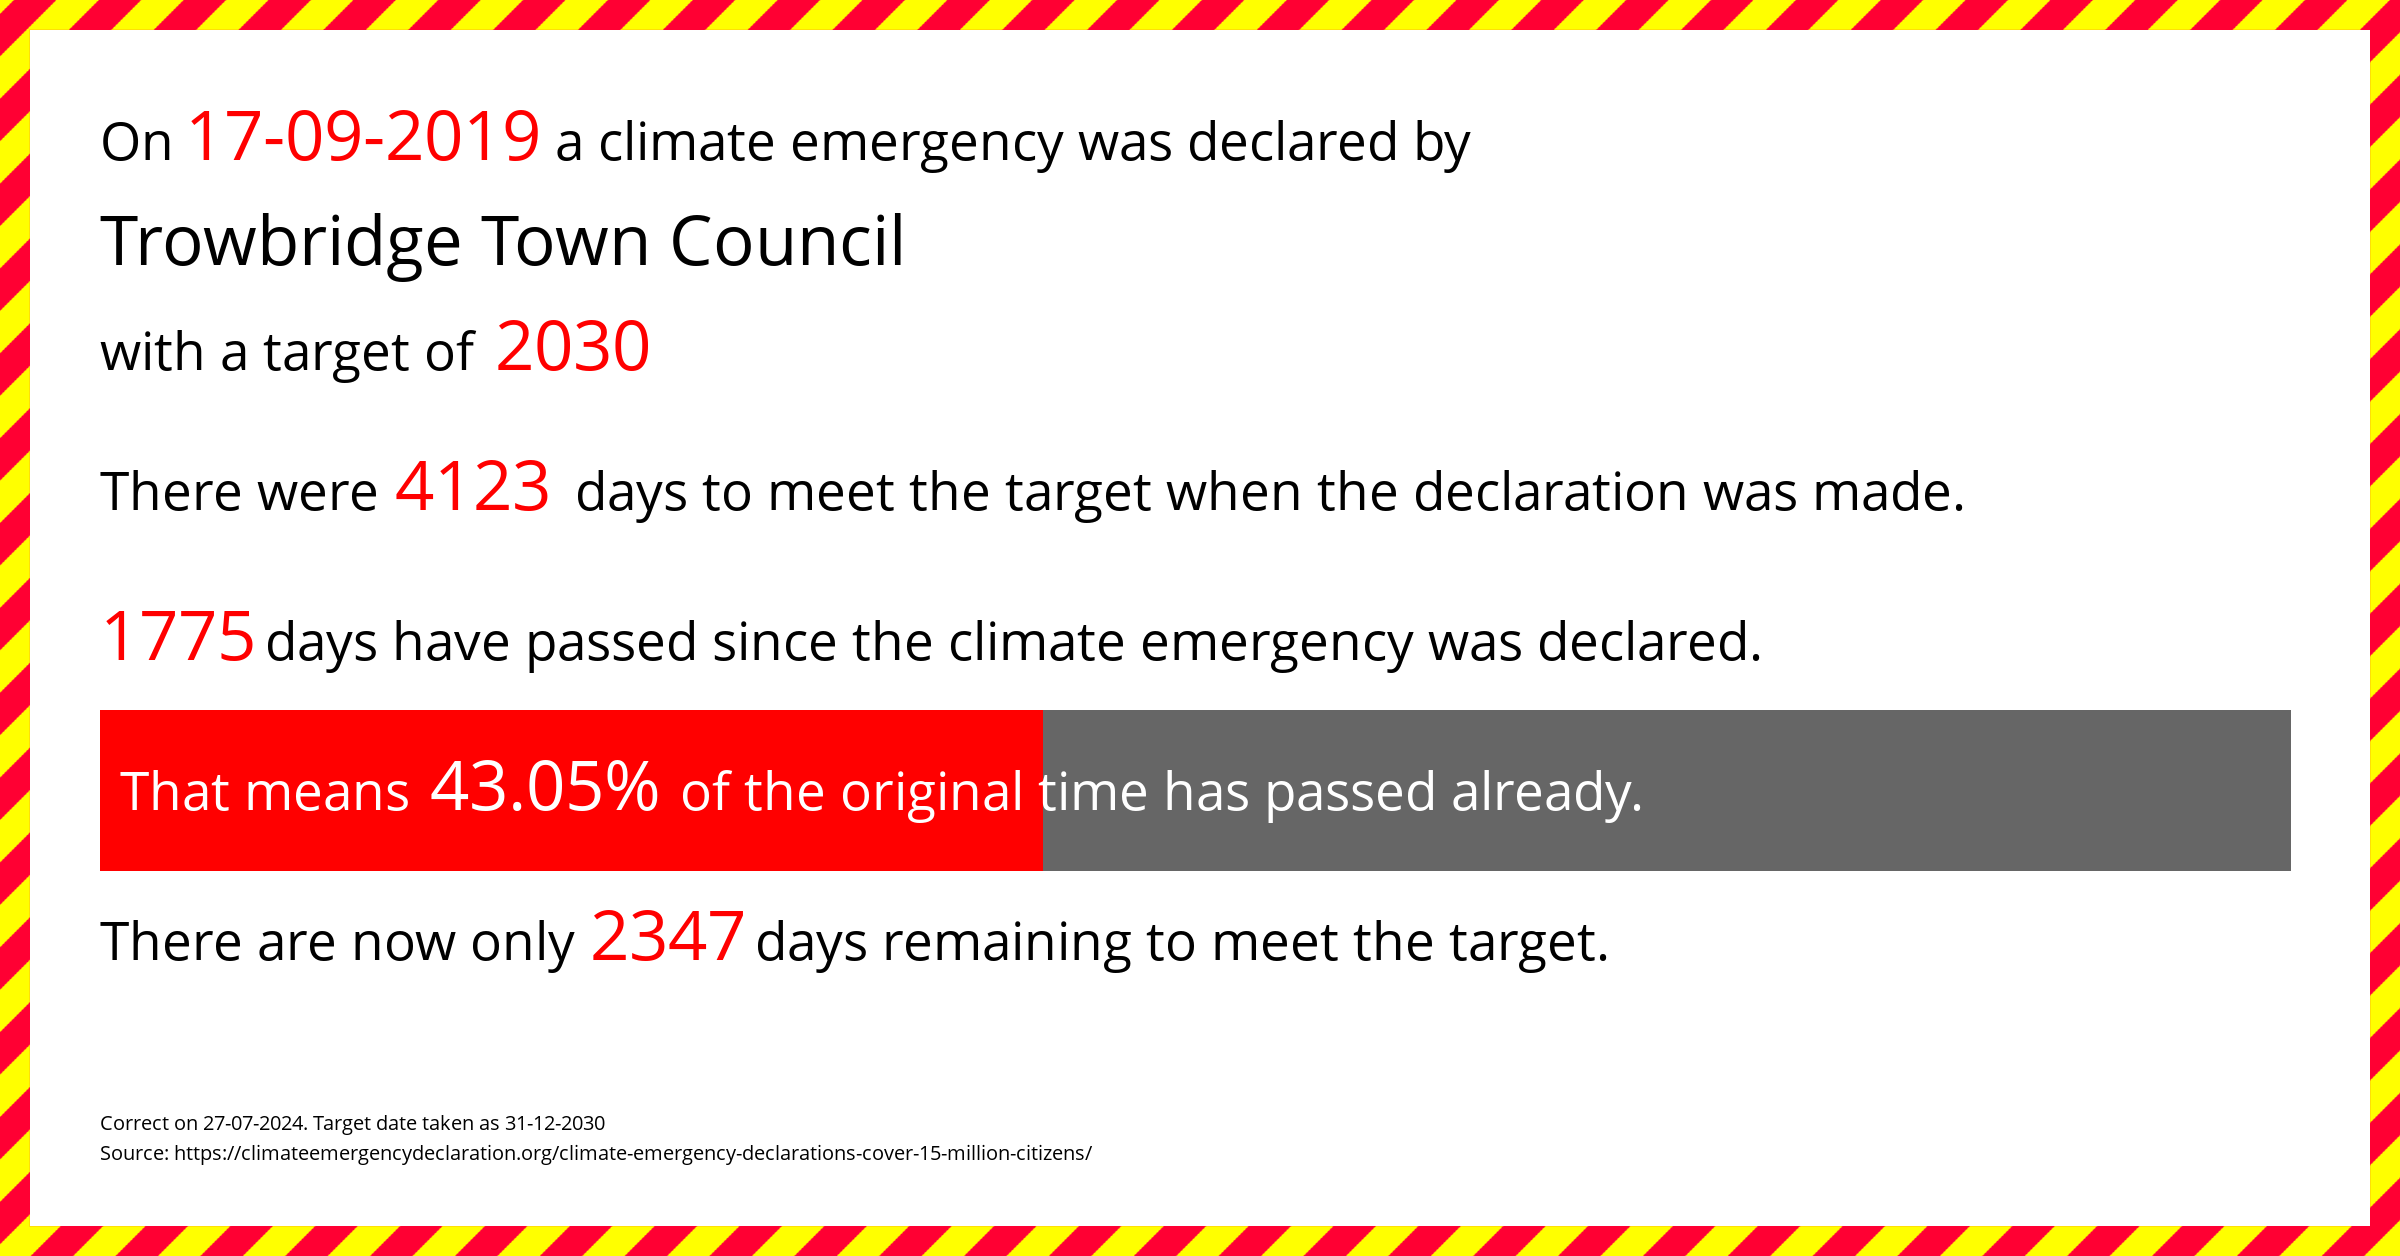 Trowbridge Town Council declared a Climate emergency on Tuesday 17th September 2019, with a target of 2030.